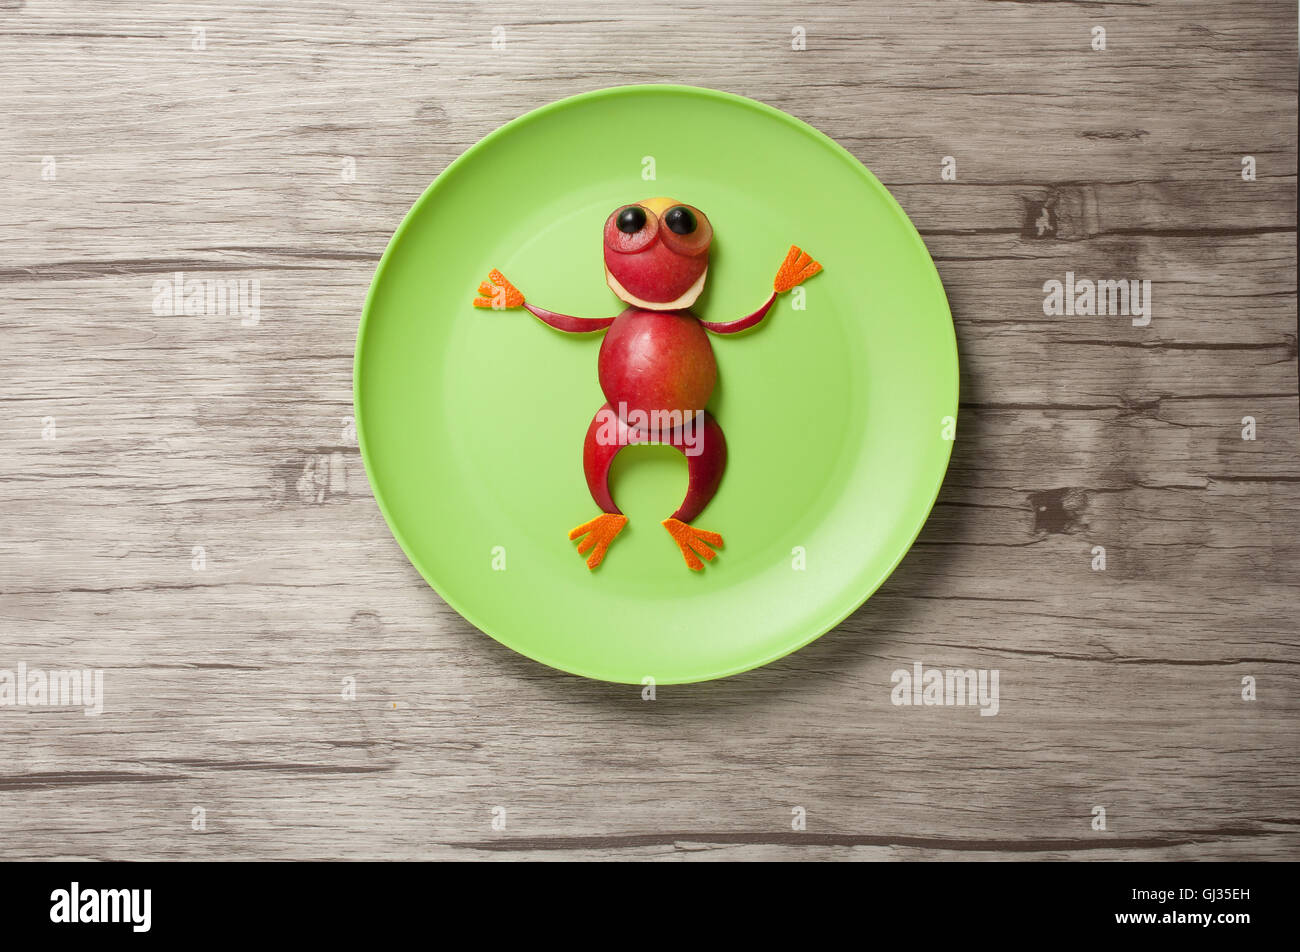 Funny Frog made of apple on plate and wood Stock Photo